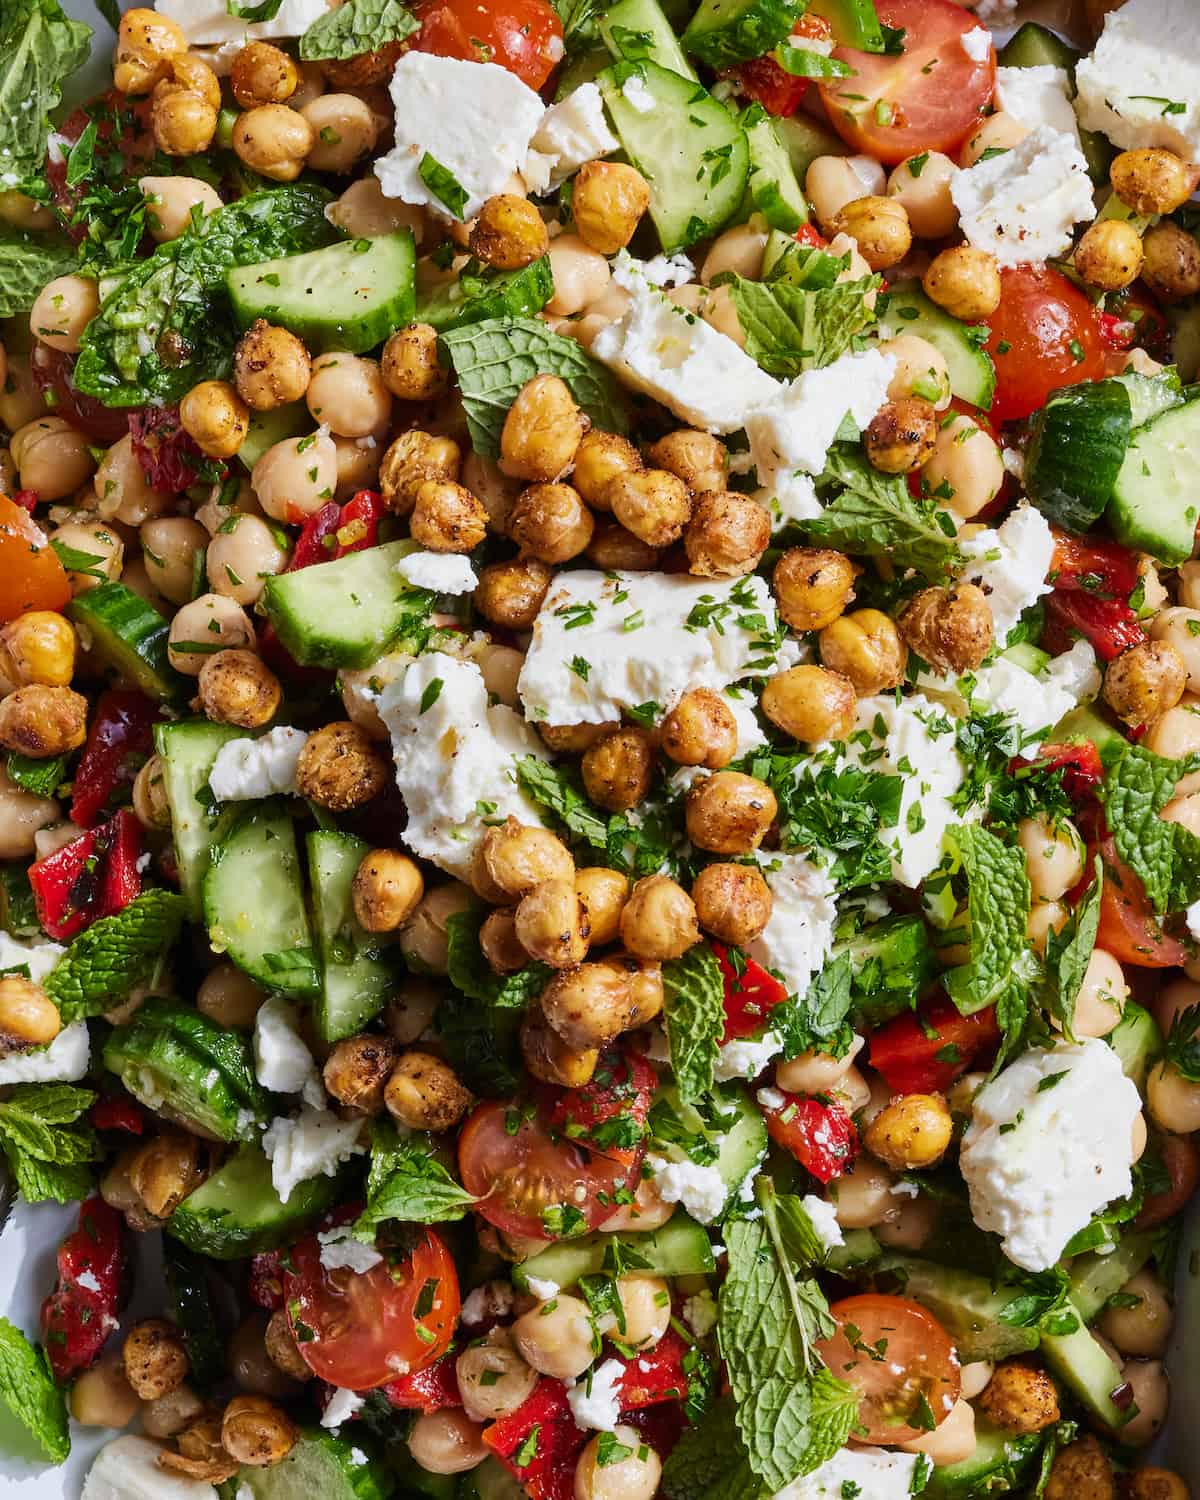 Chickpea Chopped Salad from www.whatsgabycooking.com (@whatsgabycookin)